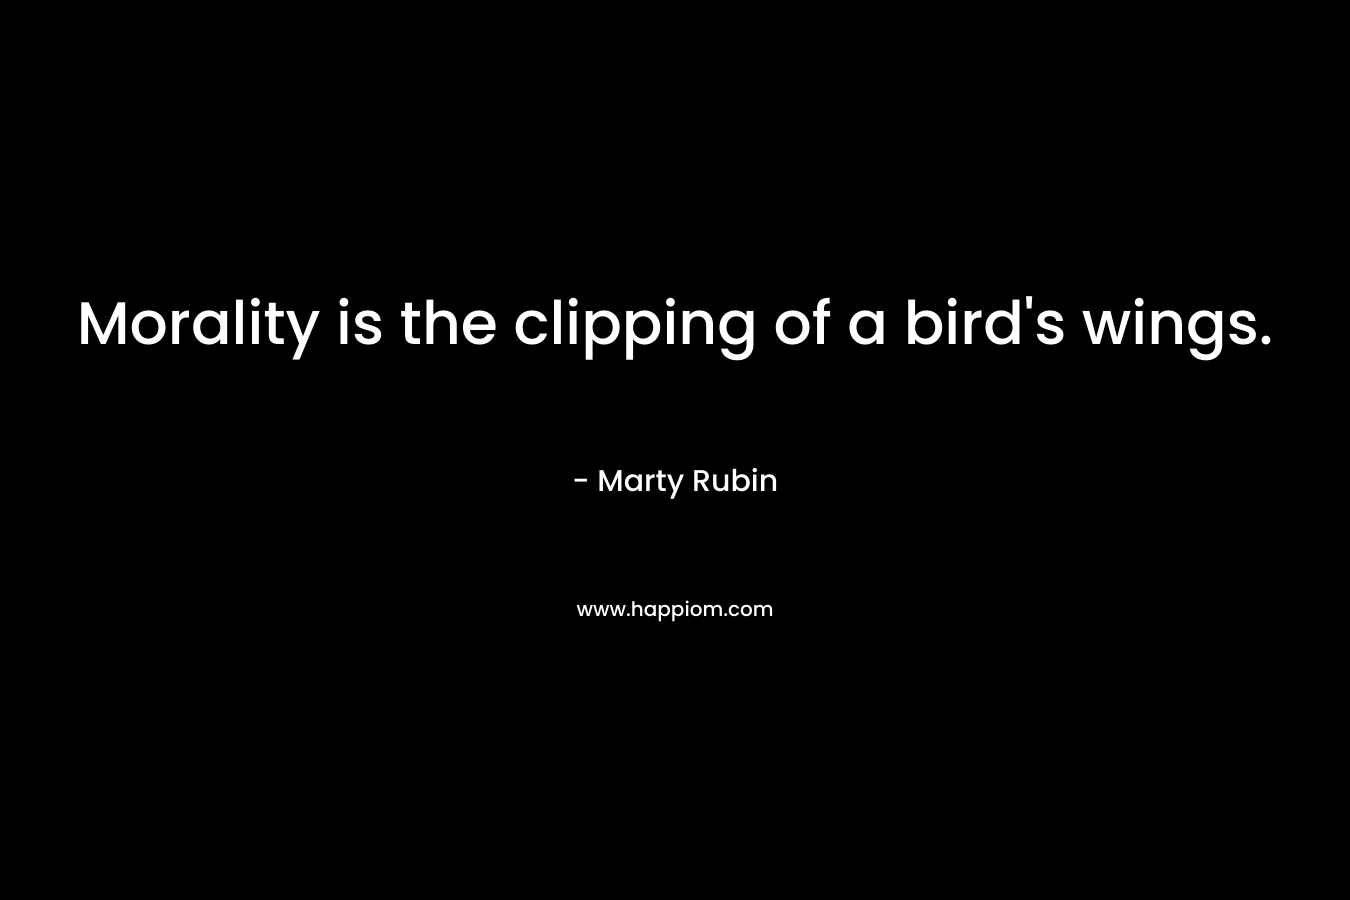 Morality is the clipping of a bird's wings.